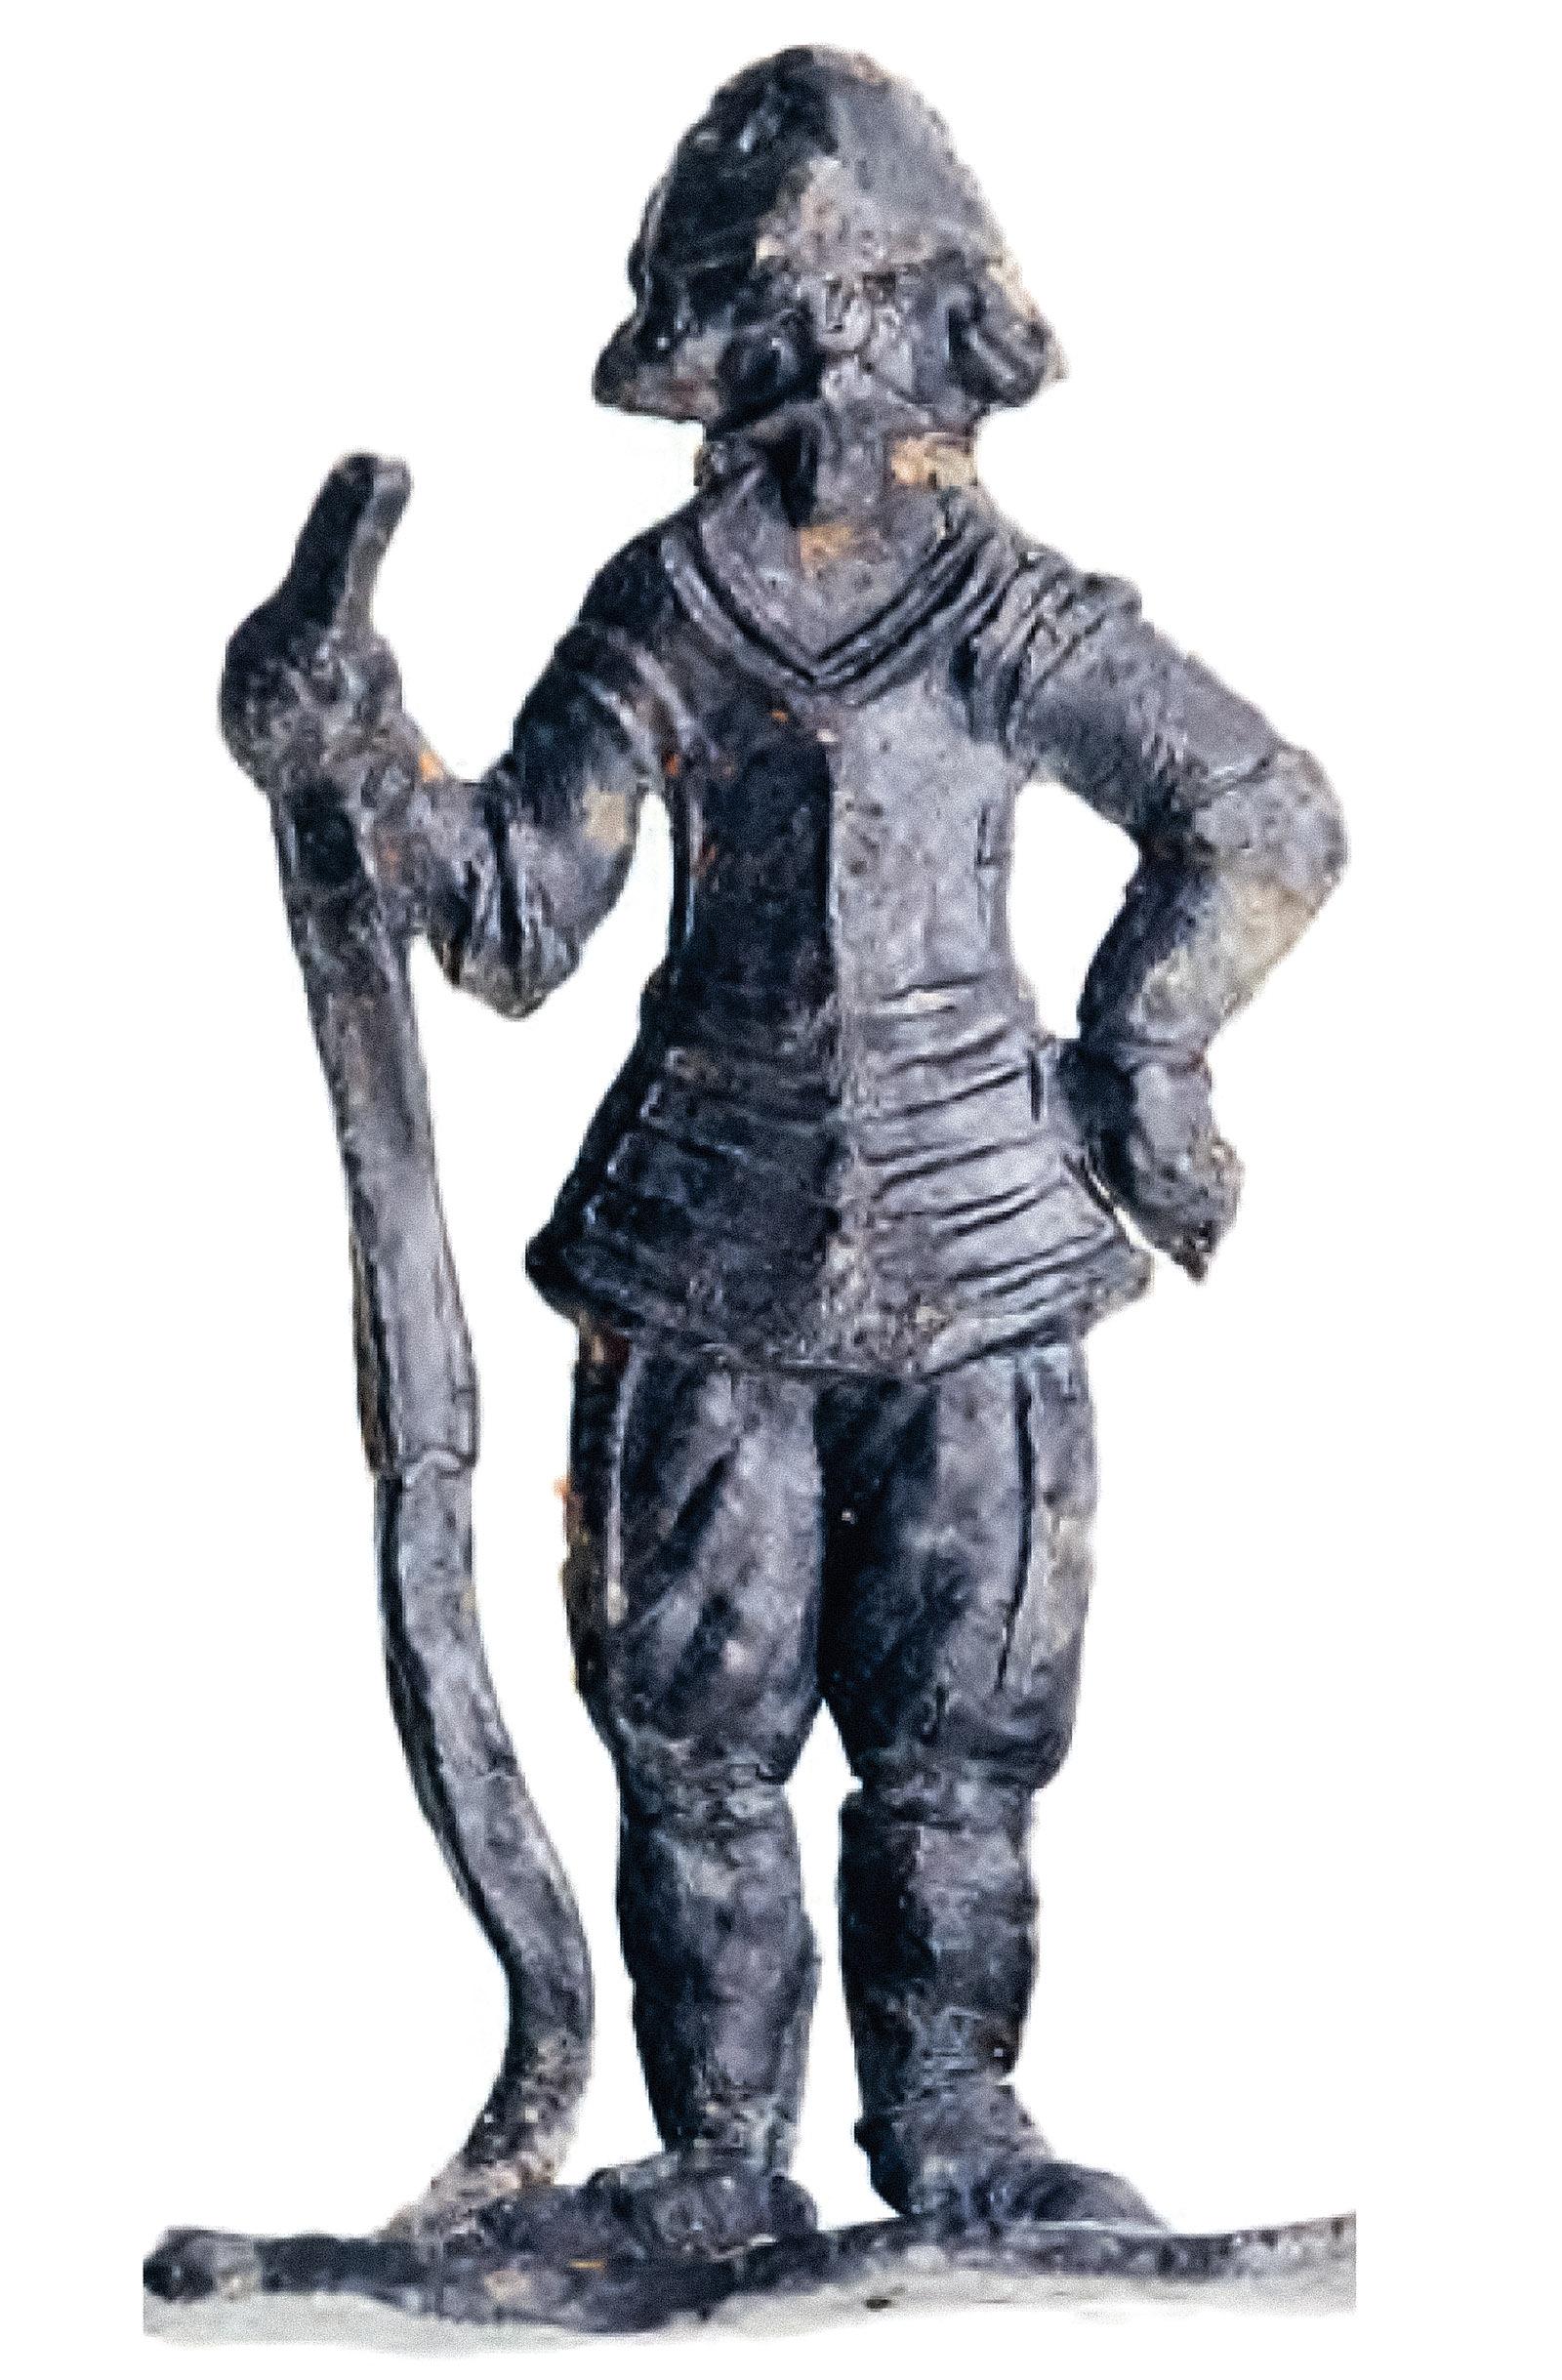 A metal toy of a pikeman from the Tudor era